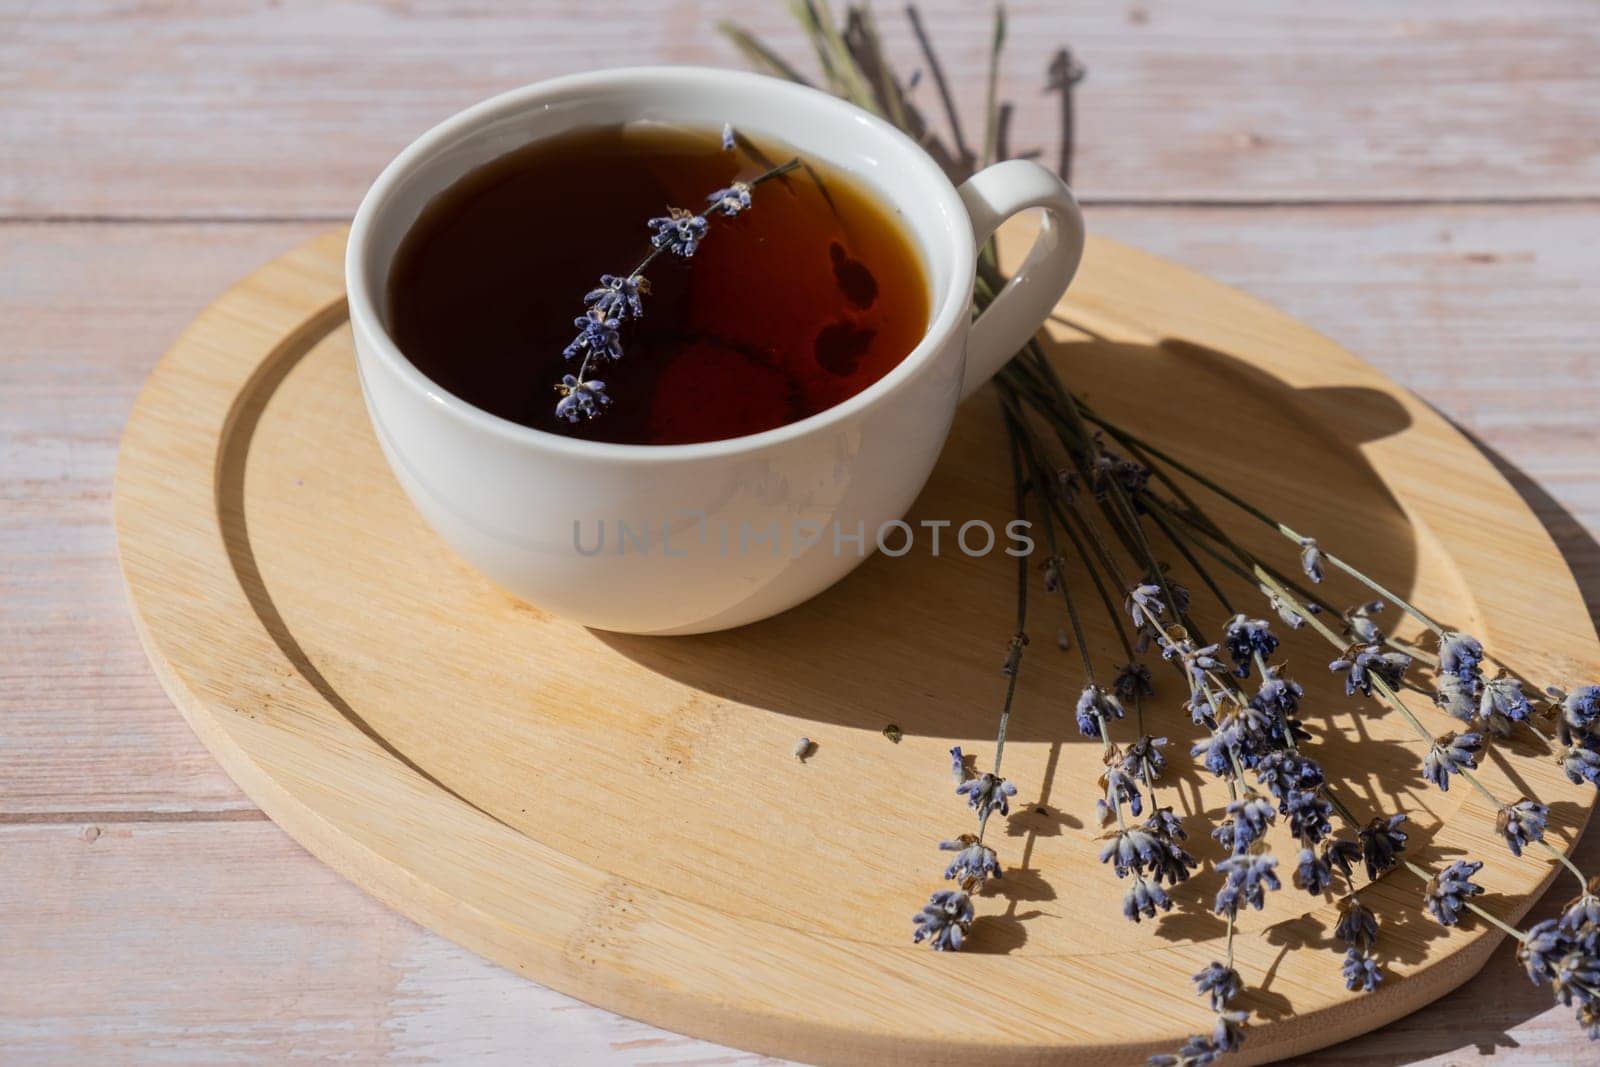 Lavender flowers with herbal cup of tea. Concept of Herbal medicine natural remedy. Organic relieving stress. Healthy beverage fresh delicious floral hot tea. Antispasmodic effect naturopathy concept